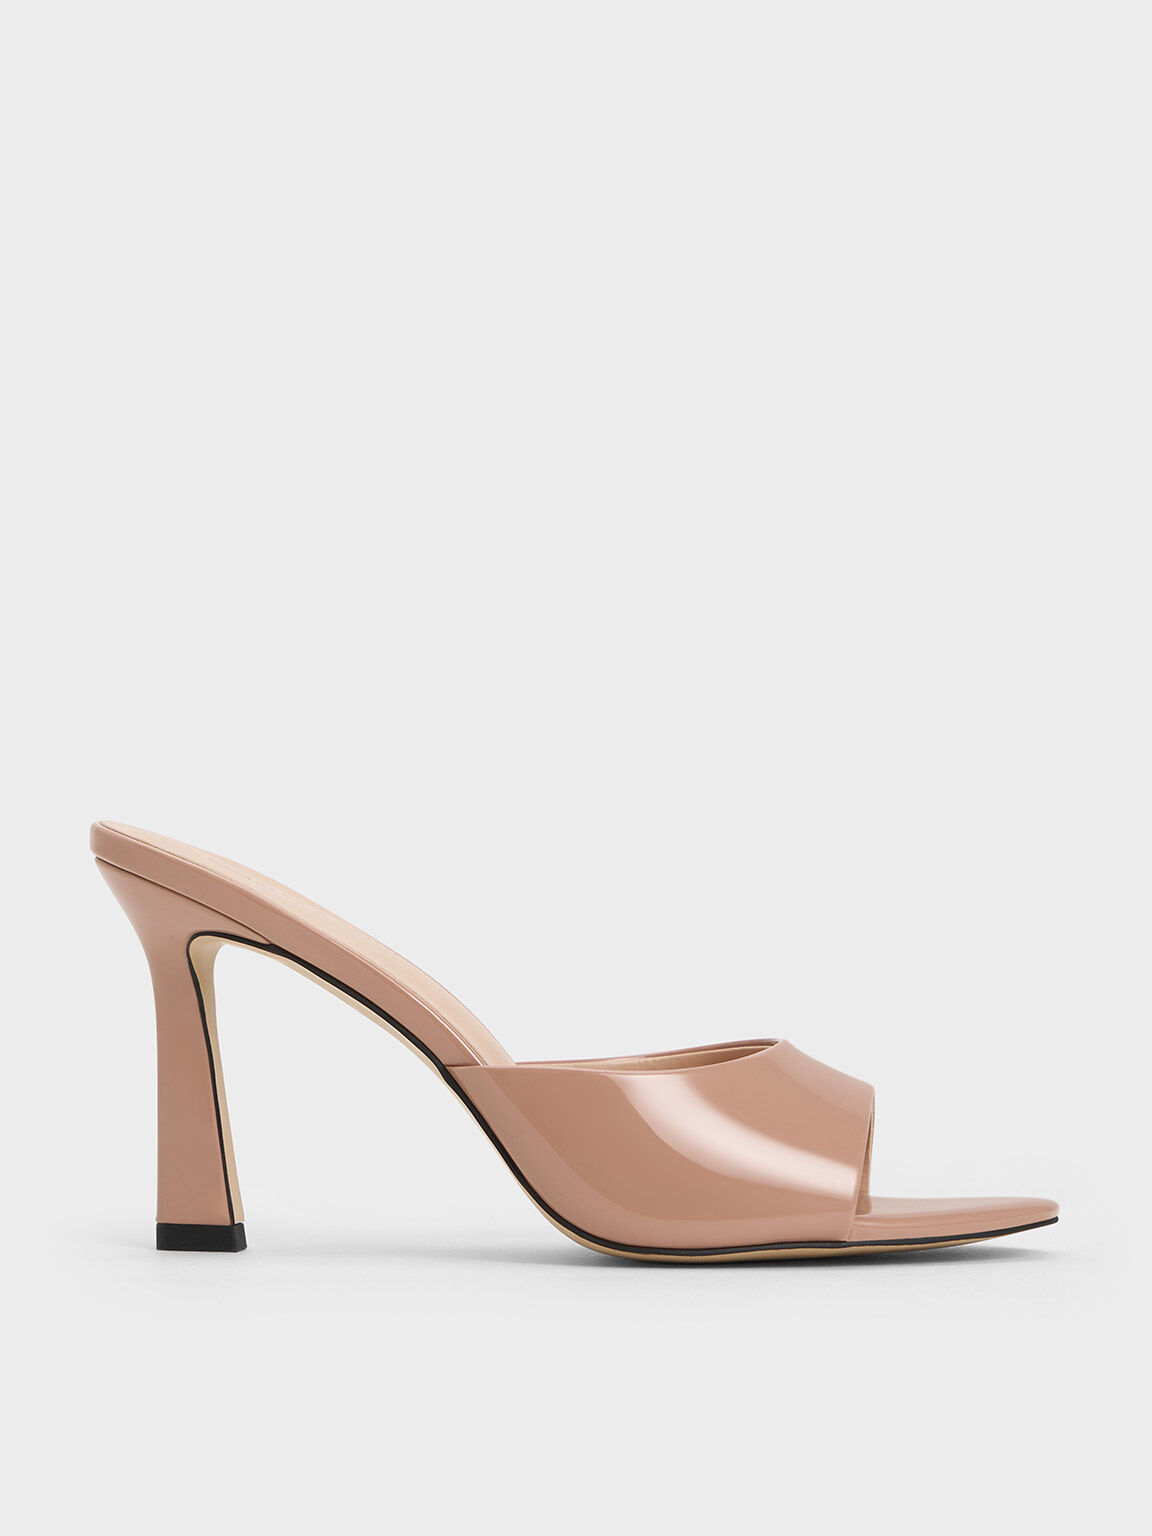 Women's Mules | Shop Exclusive Styles | CHARLES & KEITH US